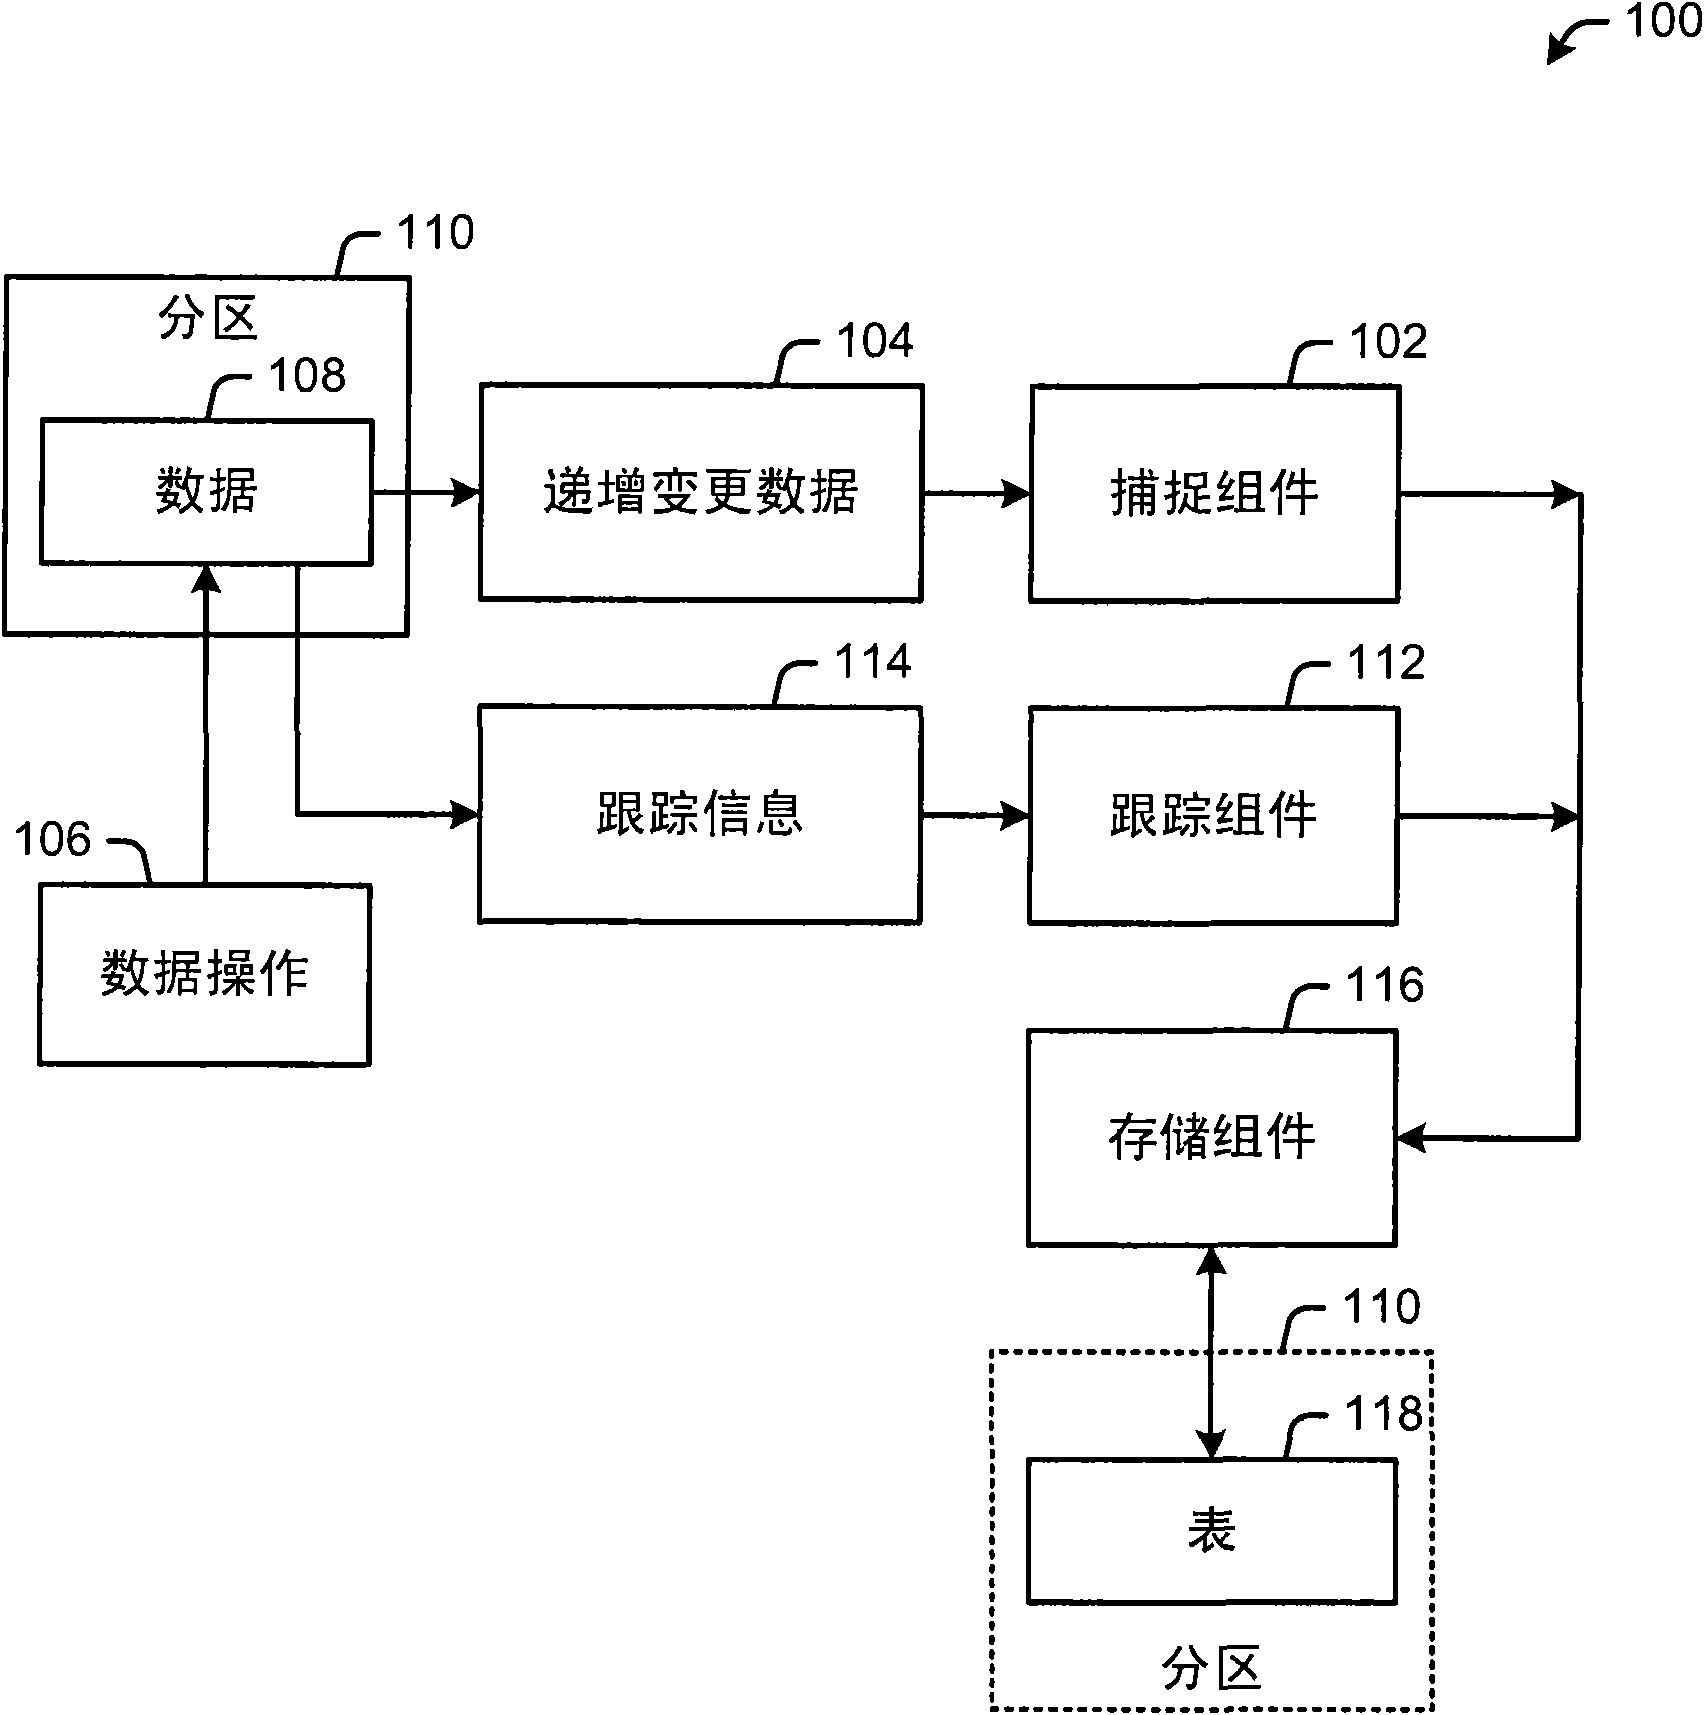 Logical data backup and rollback using incremental capture in a distributed database